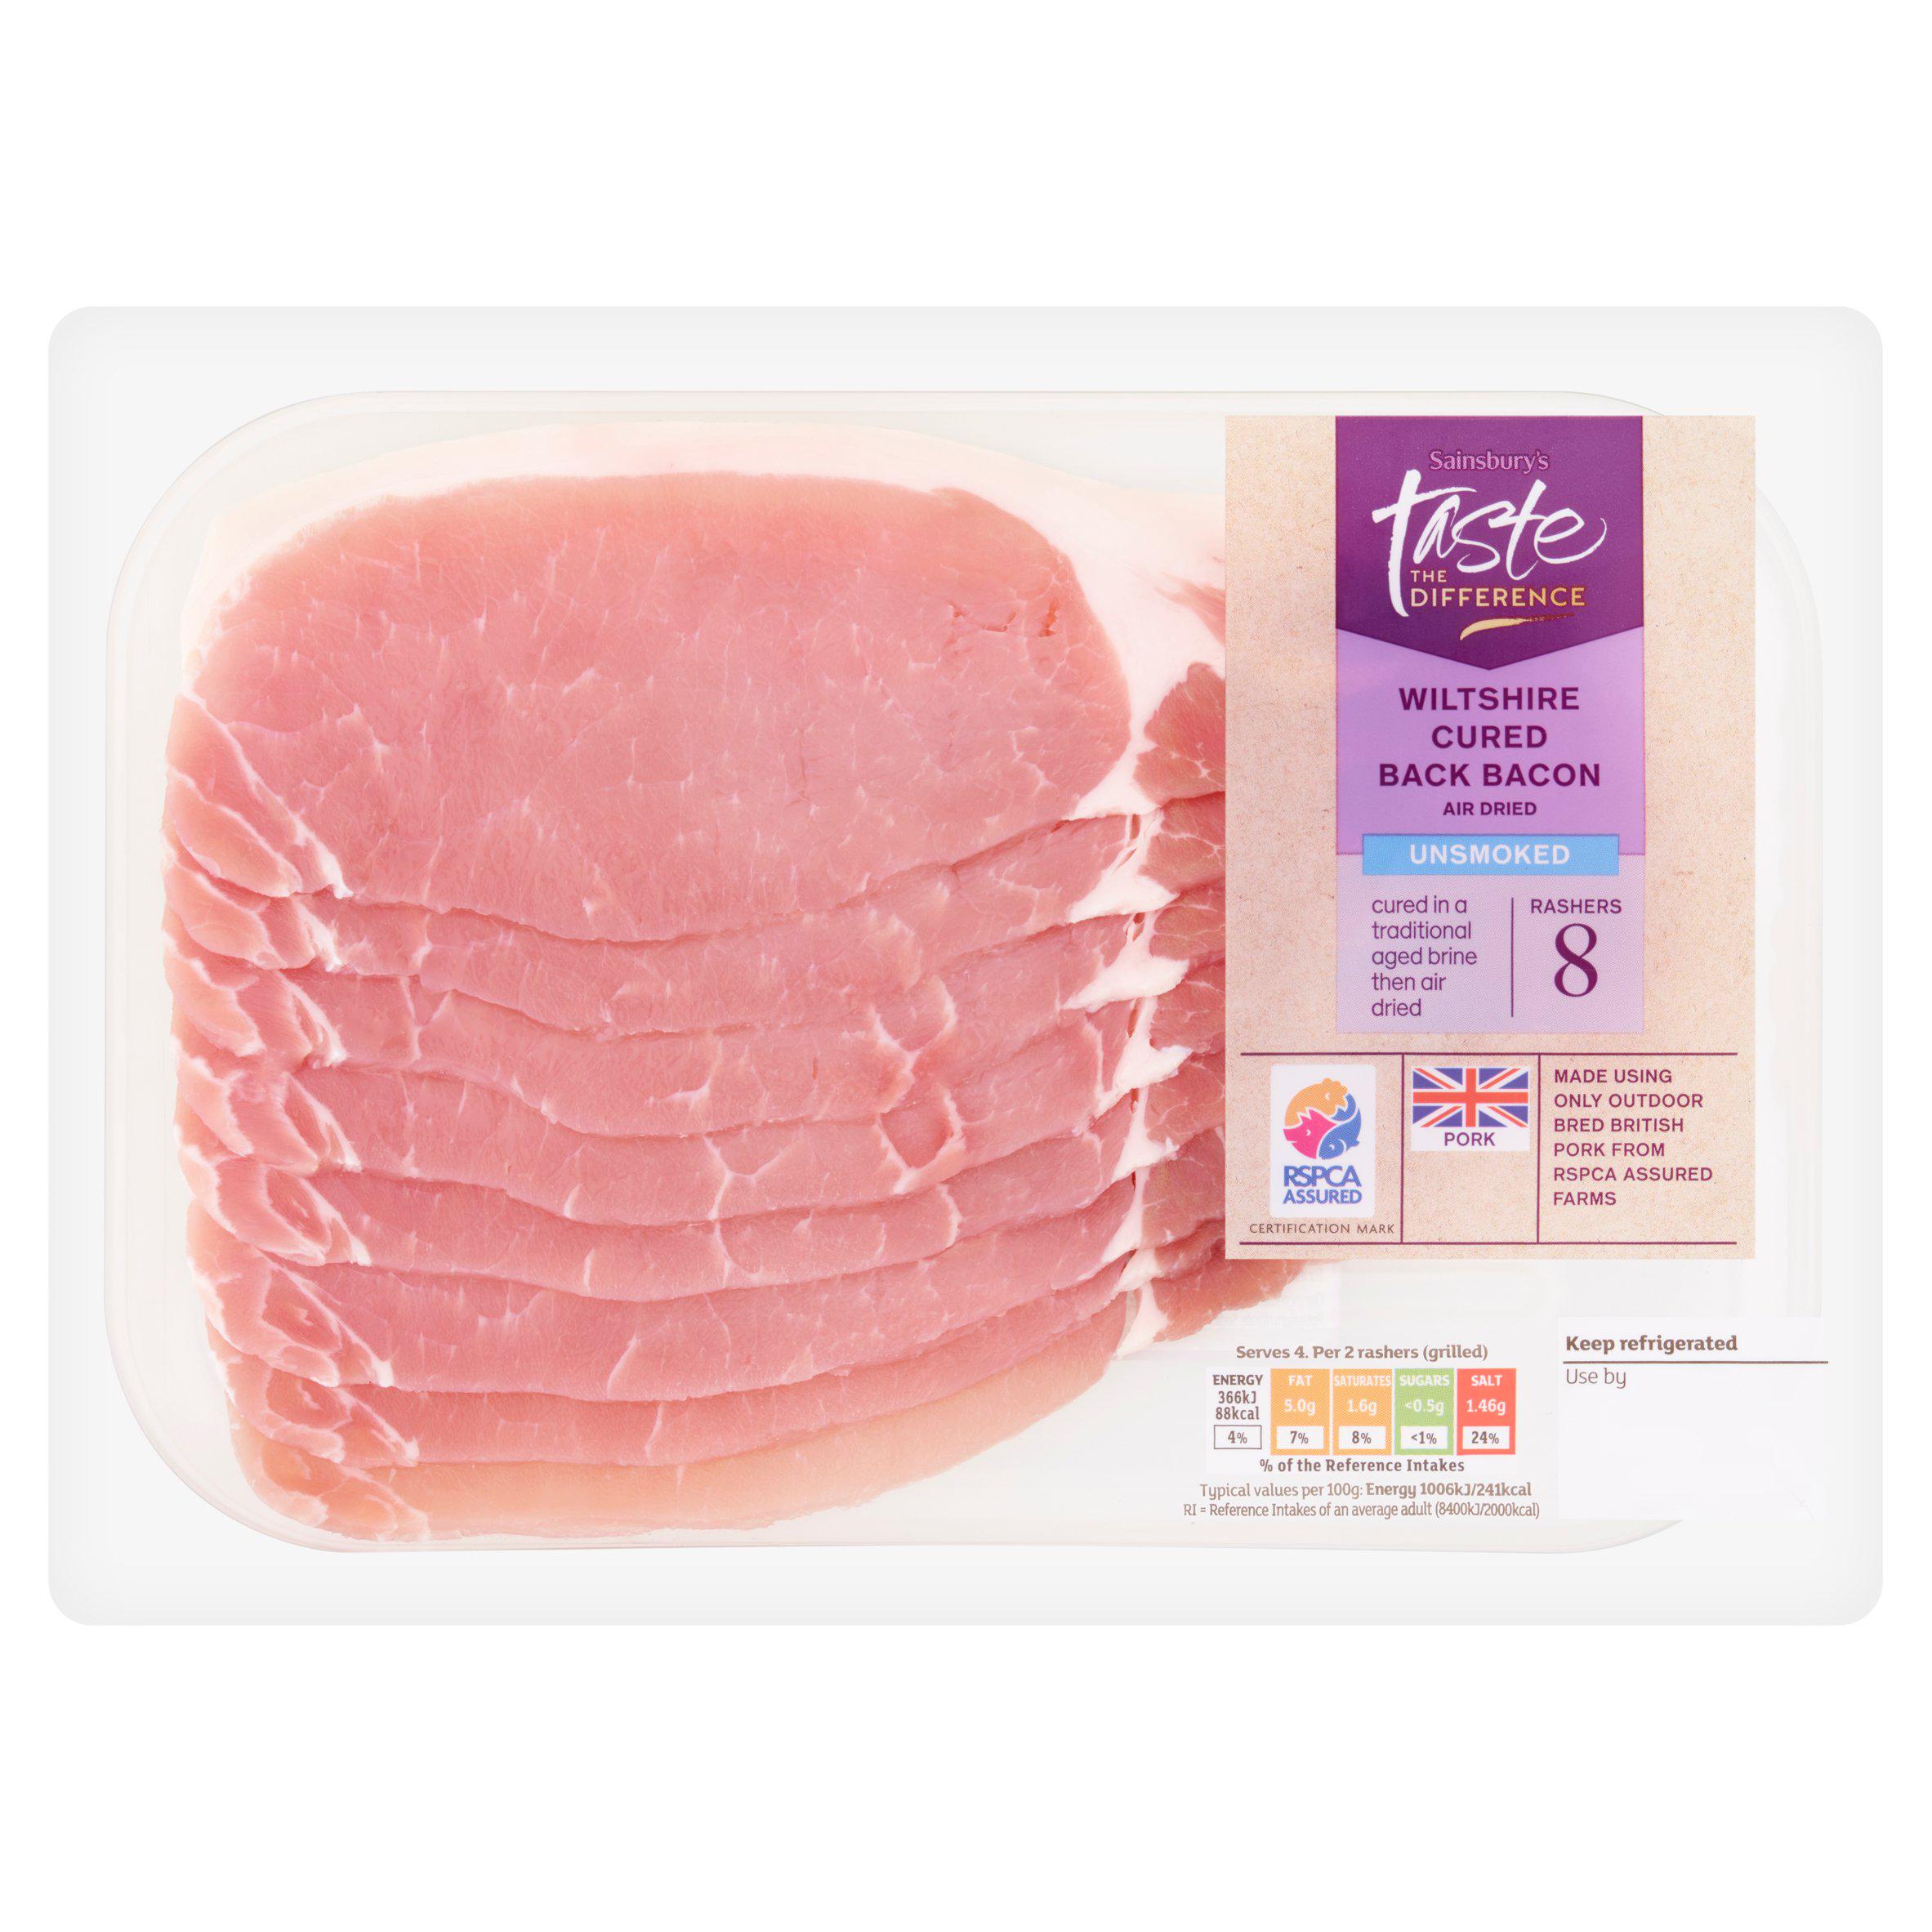 Sainsbury's Unsmoked Air Dried Wiltshire Cured Back Bacon Rashers, Taste the Difference x8 240g